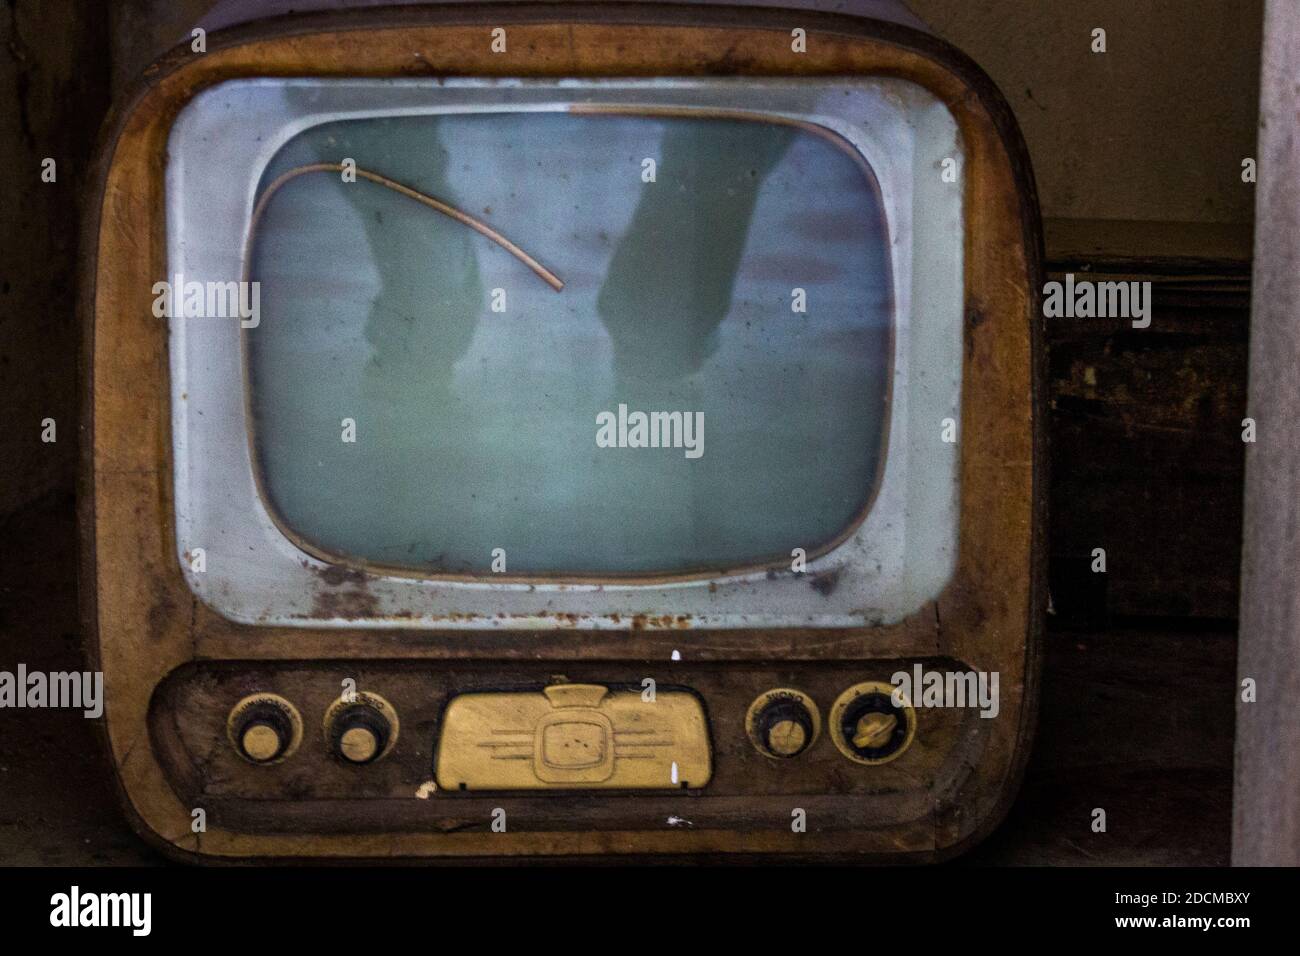 Picture of an Abandoned vintage television without remote control Stock Photo